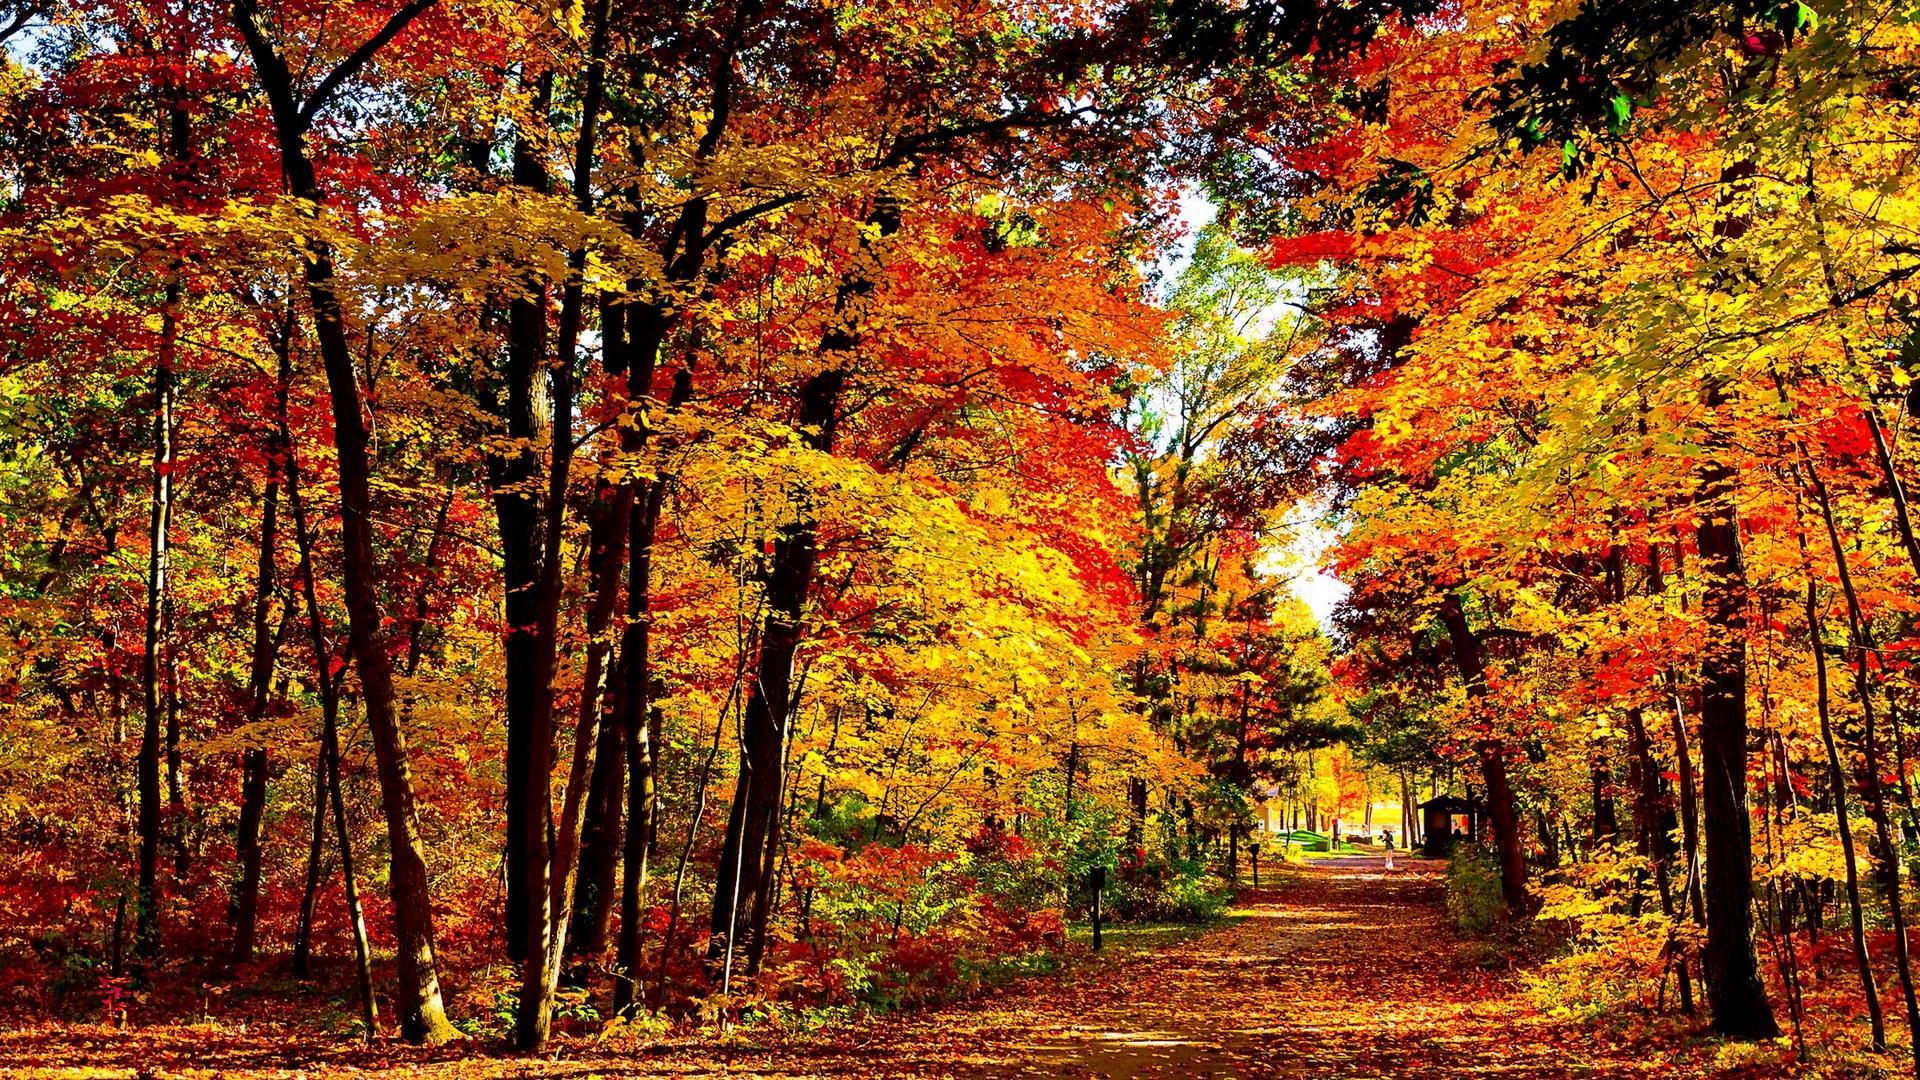 Wood Autumn Trees and Fallen Leaves Wallpaper